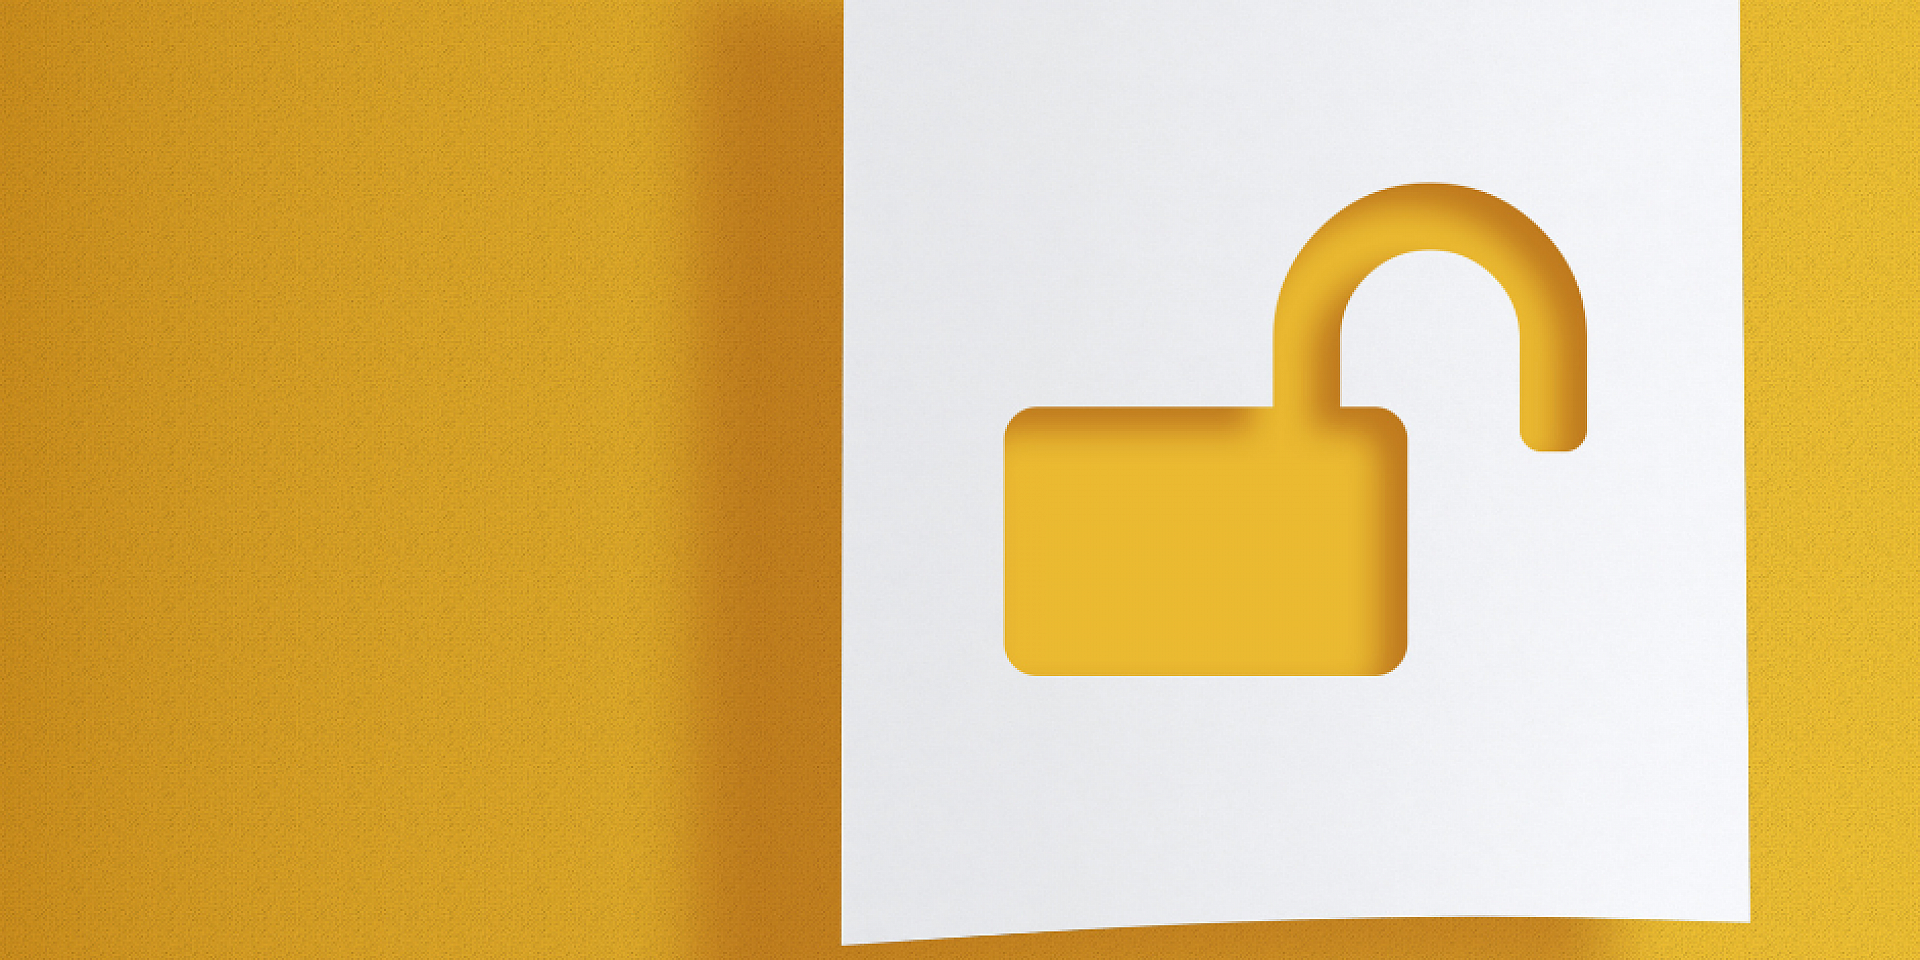 Open lock on a yellow background